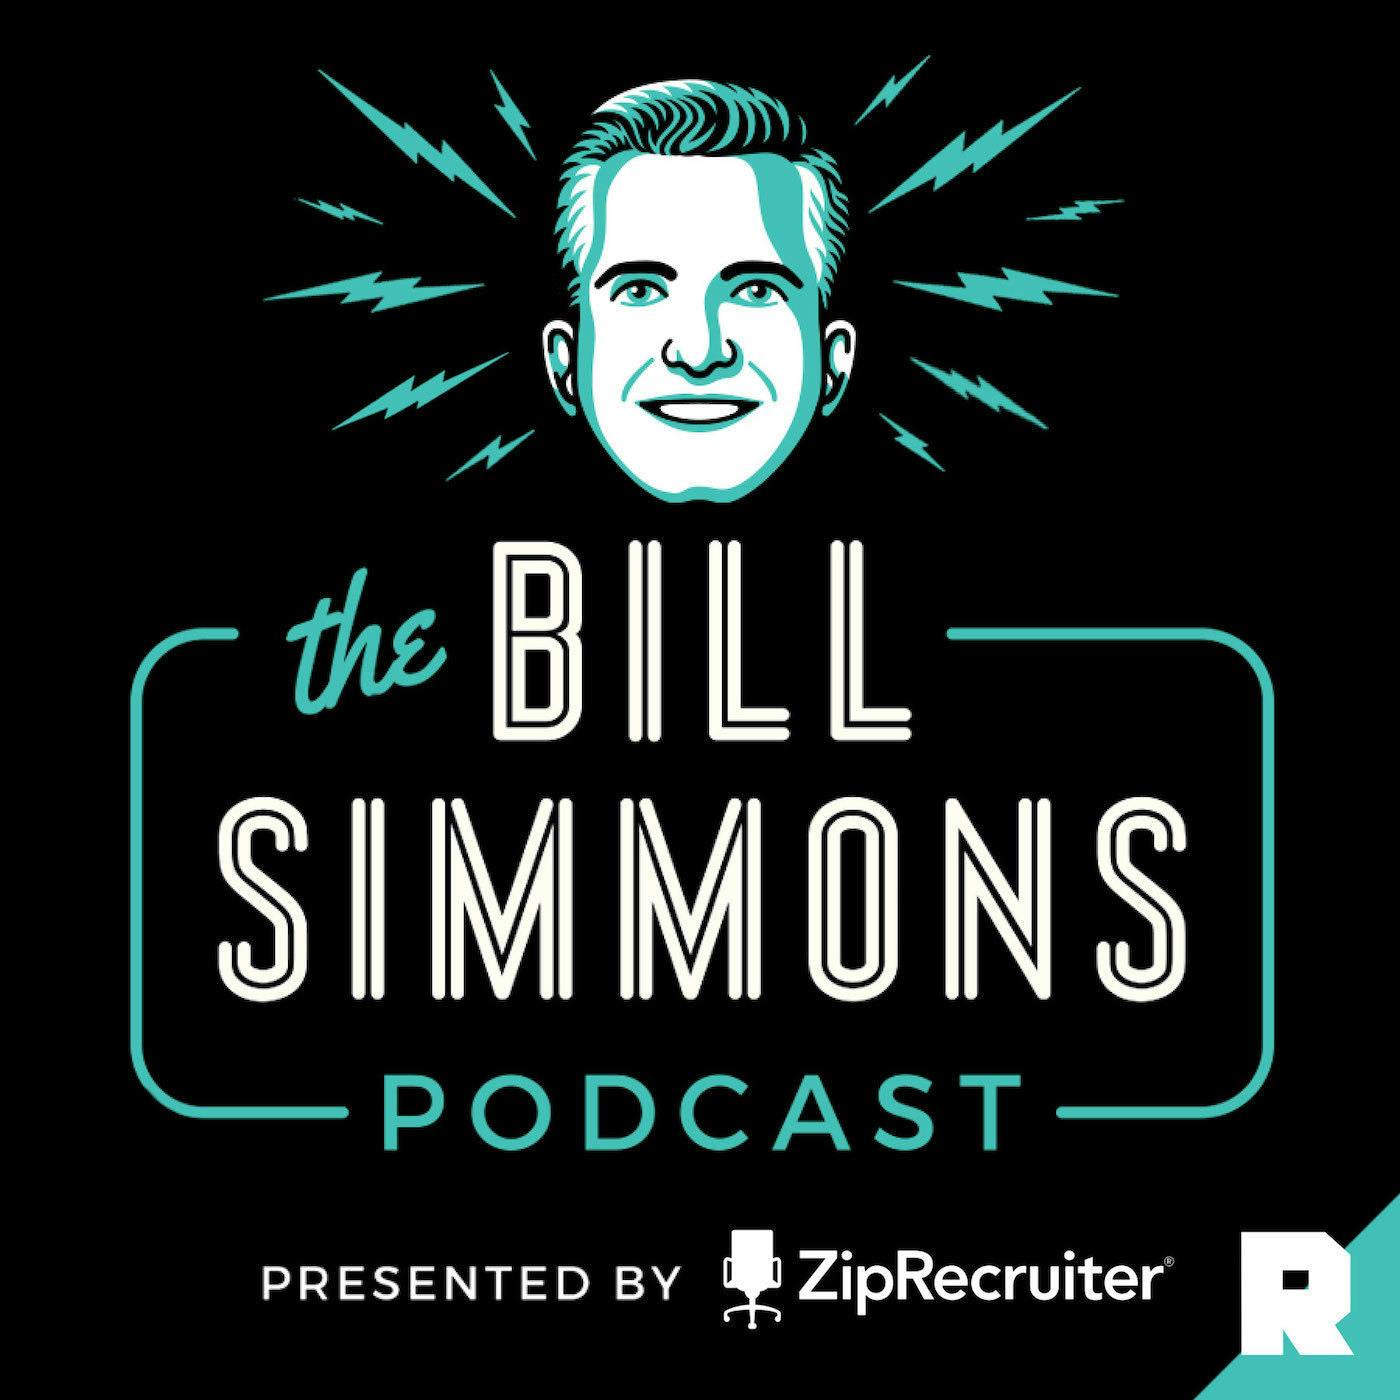 Chuck Klosterman on the Tiger Woods Book, NFL Draft QBs, and Rondo's Renaissance | The Bill Simmons Podcast (Ep. 355)